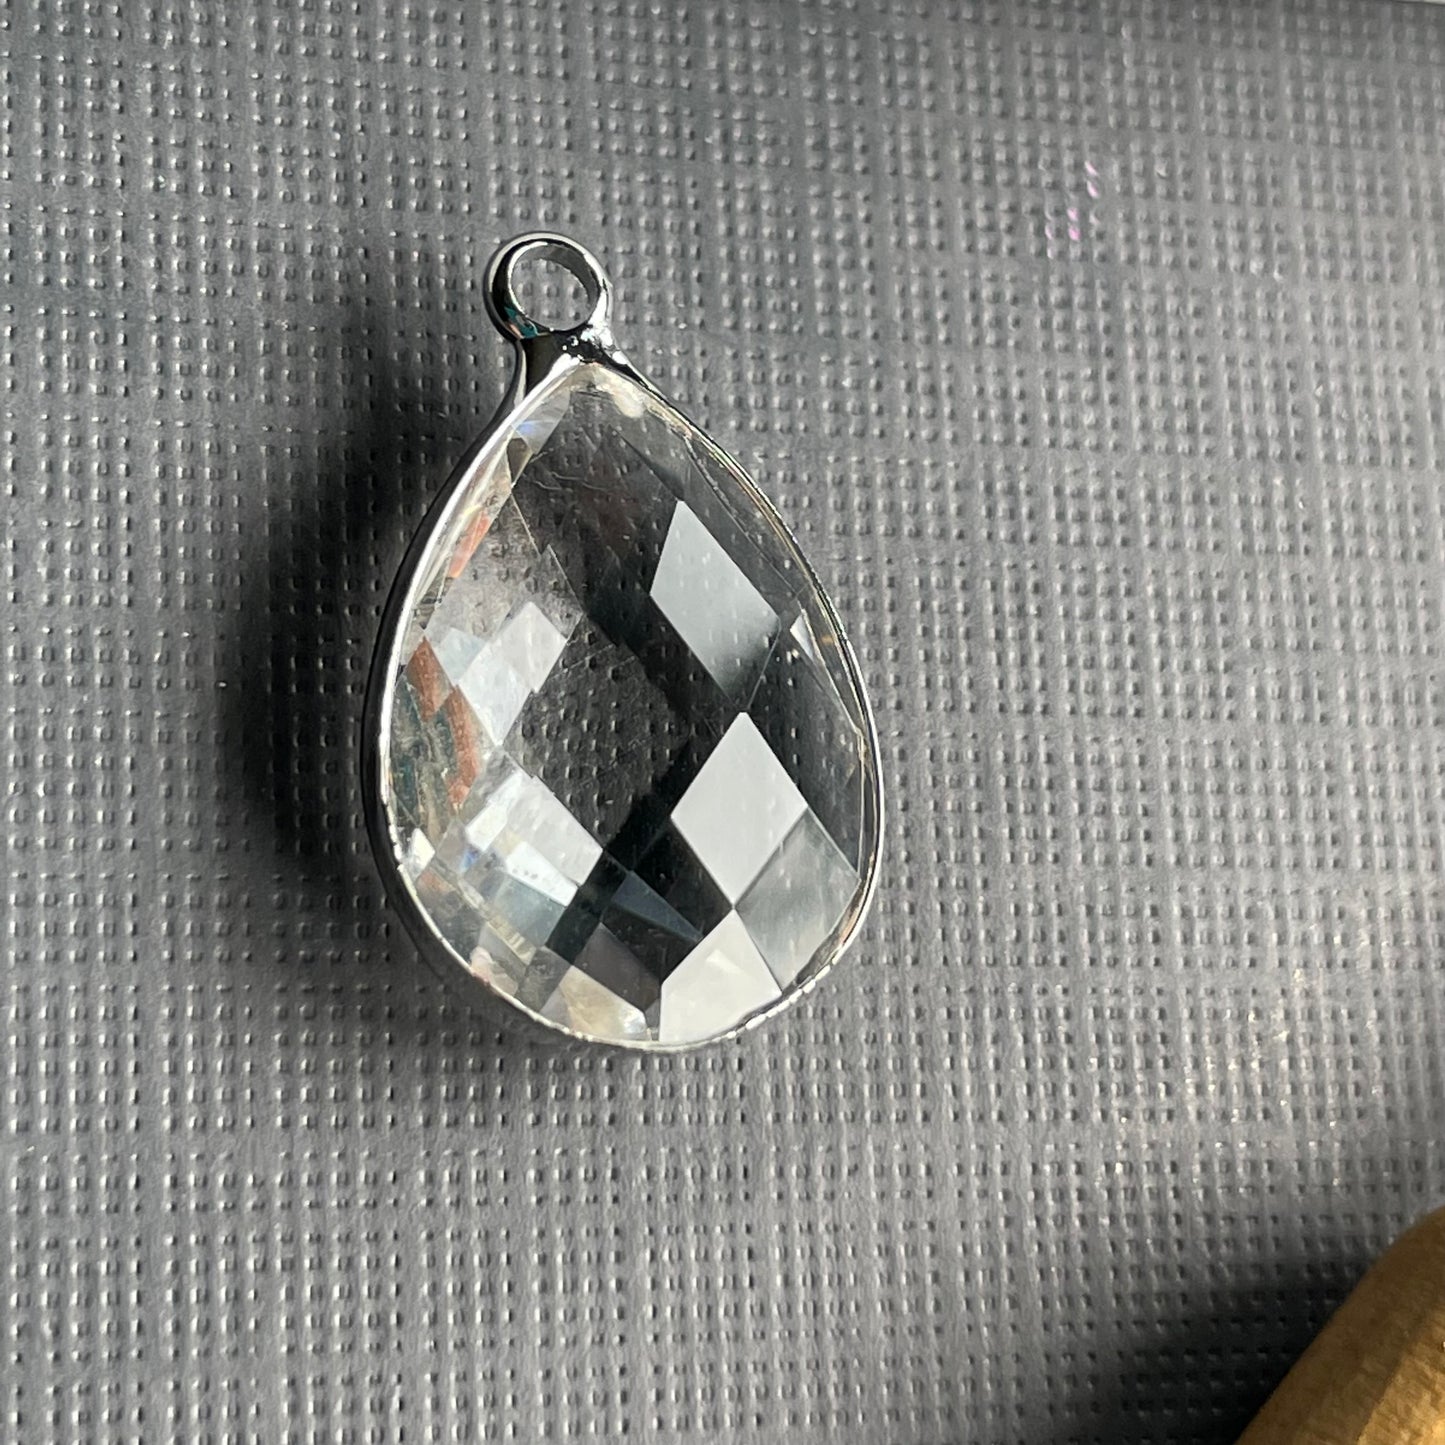 Faceted glass teardrop 13mm x 18mm - 6 pieces